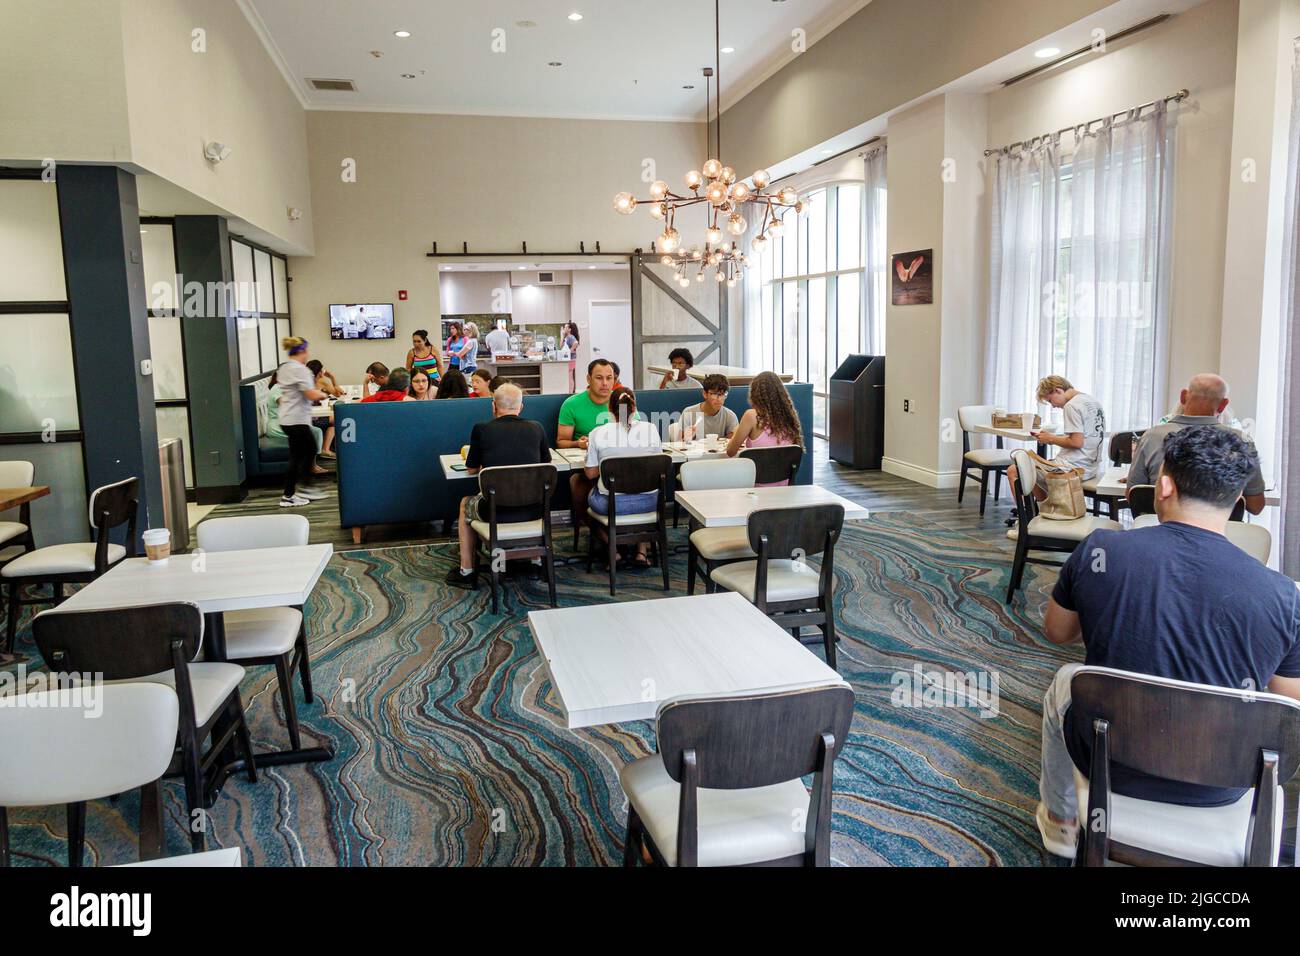 Fort Ft. Myers Florida,Residence Inn by Marriott Fort Myers Sanibel hotel lodging,inside interior included free breakfast room dining area self-servic Stock Photo